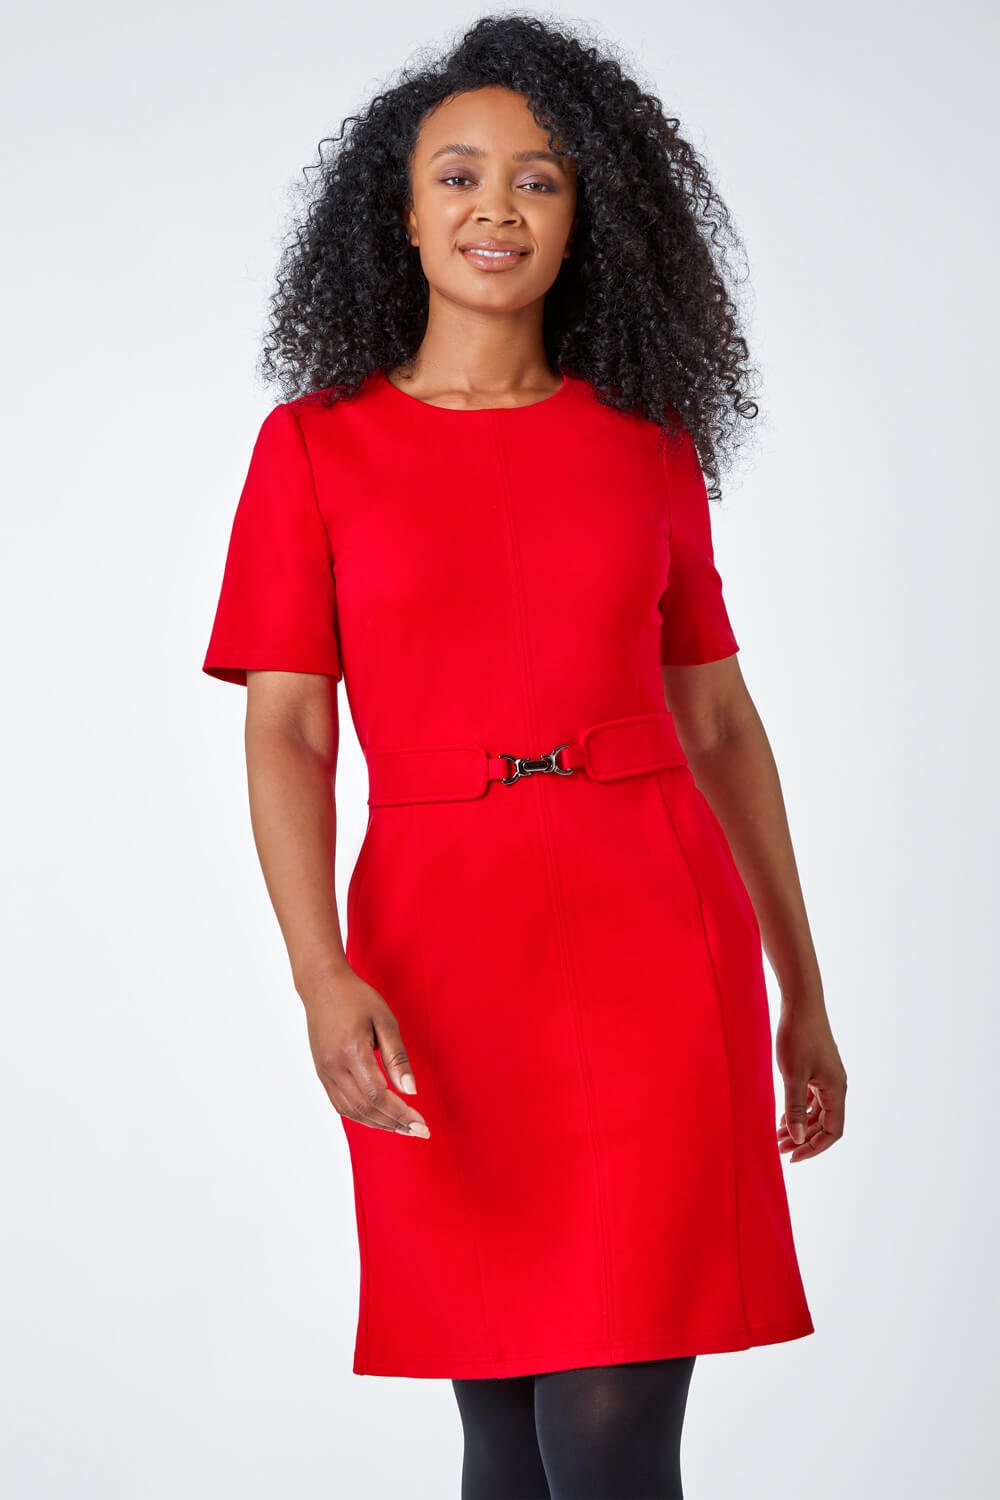 Red Petite Belted Shift Stretch Dress, Image 2 of 5